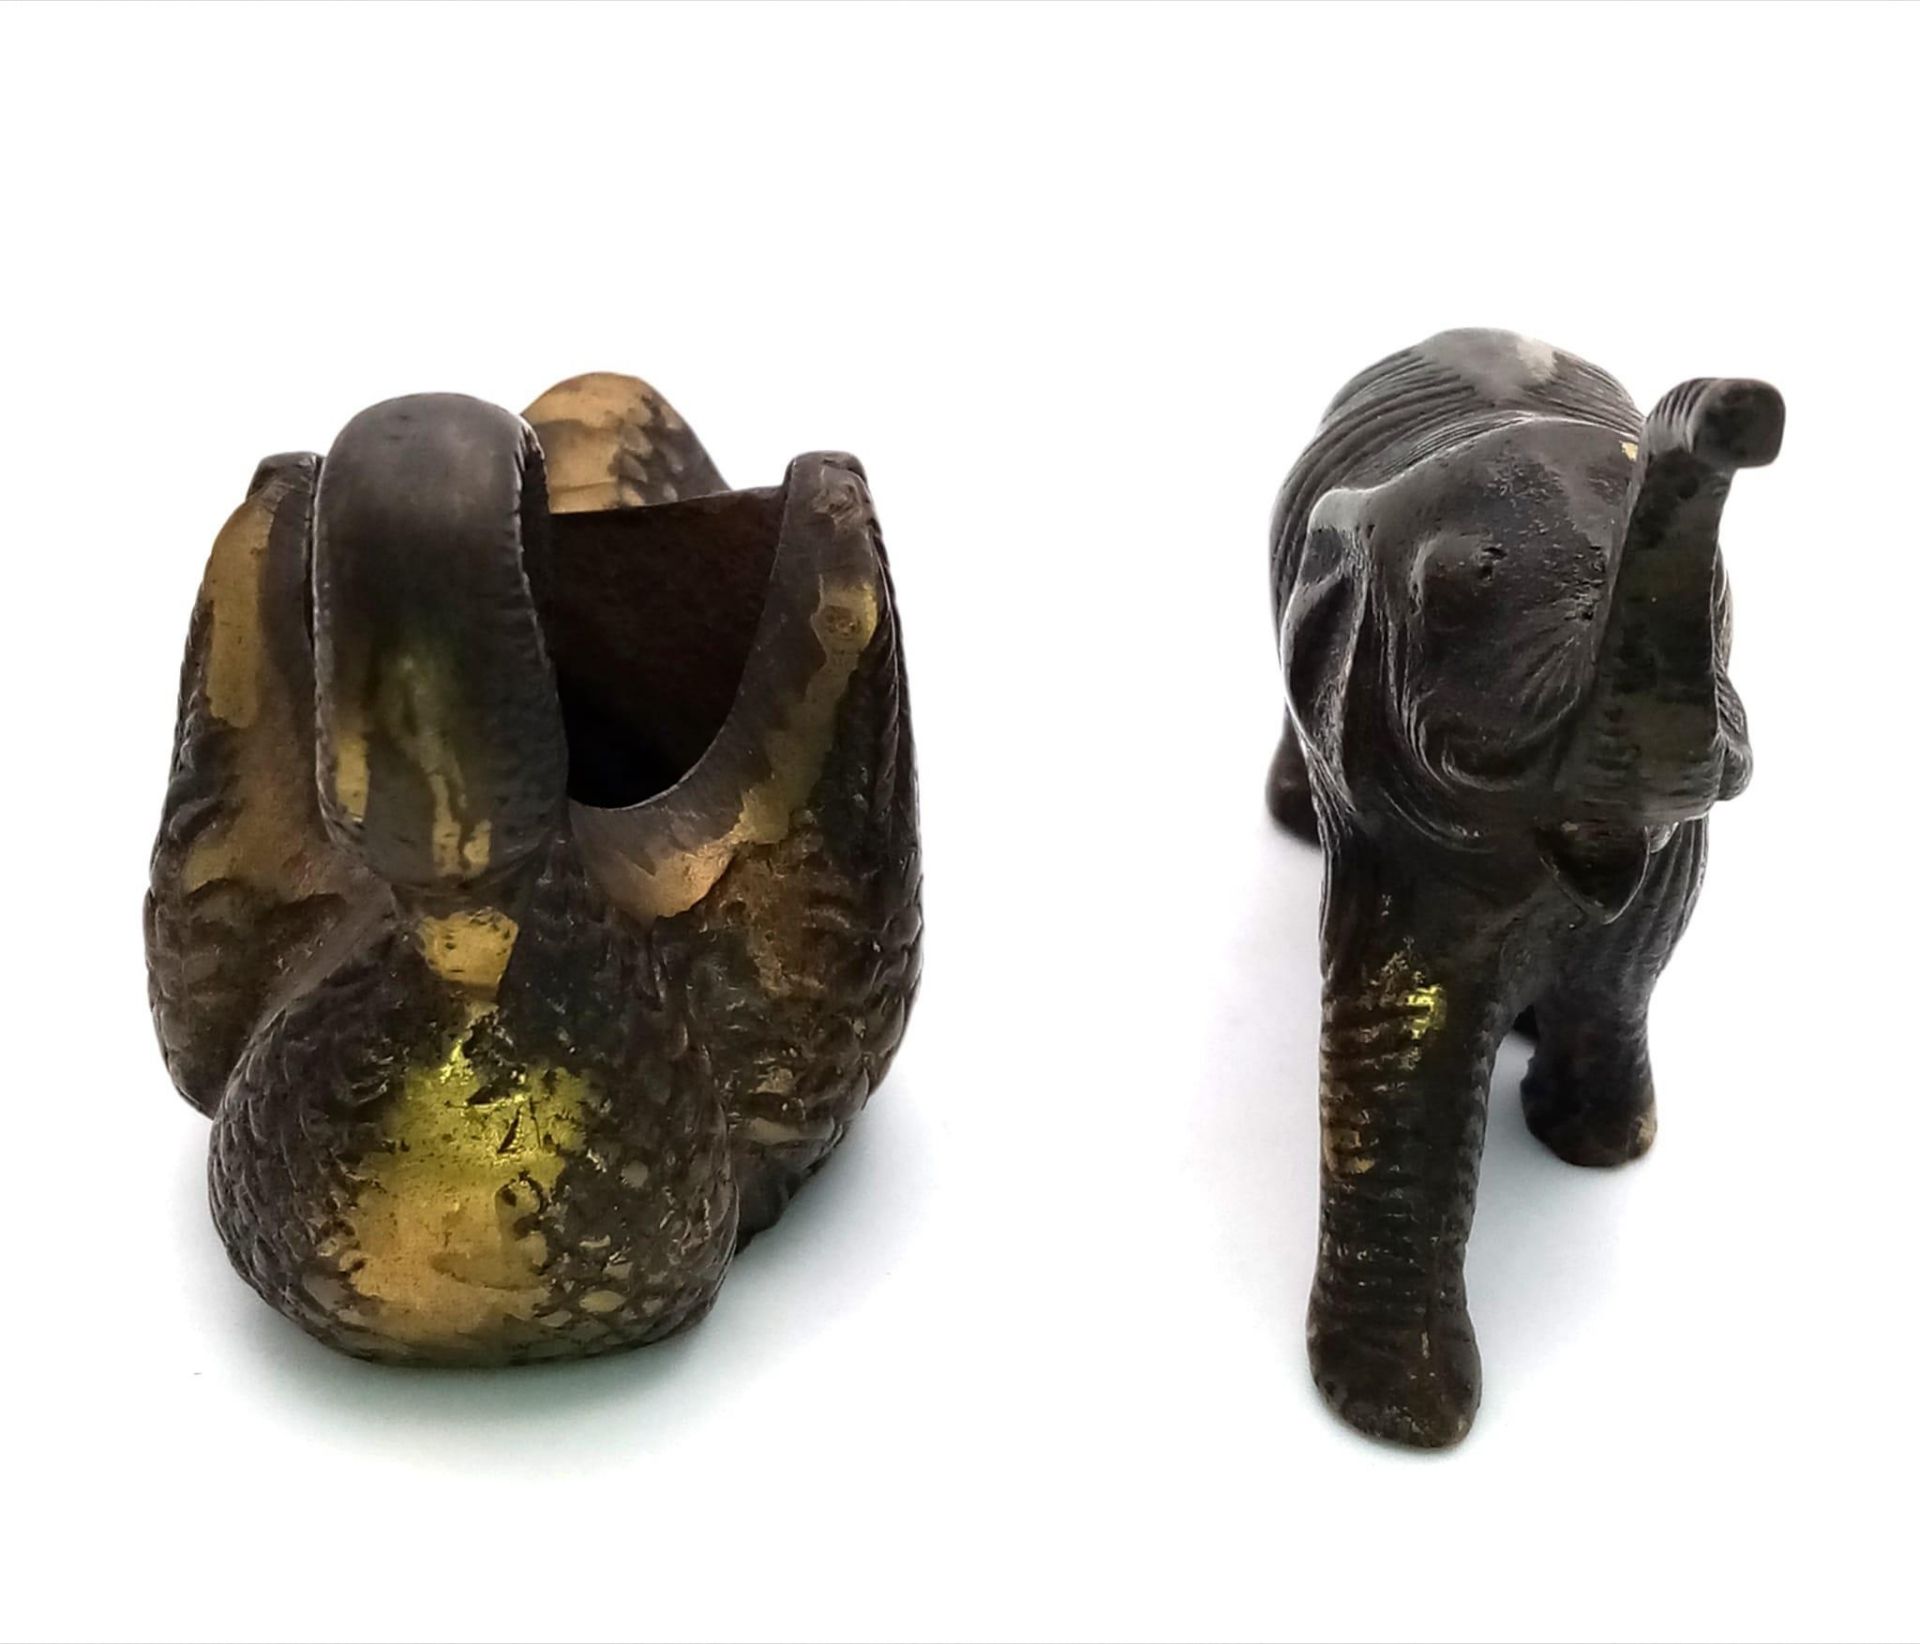 Two Small Vintage Brass Animal Figures. An Elephant and Swan - Both with wonderful patinas. Elephant - Image 4 of 7